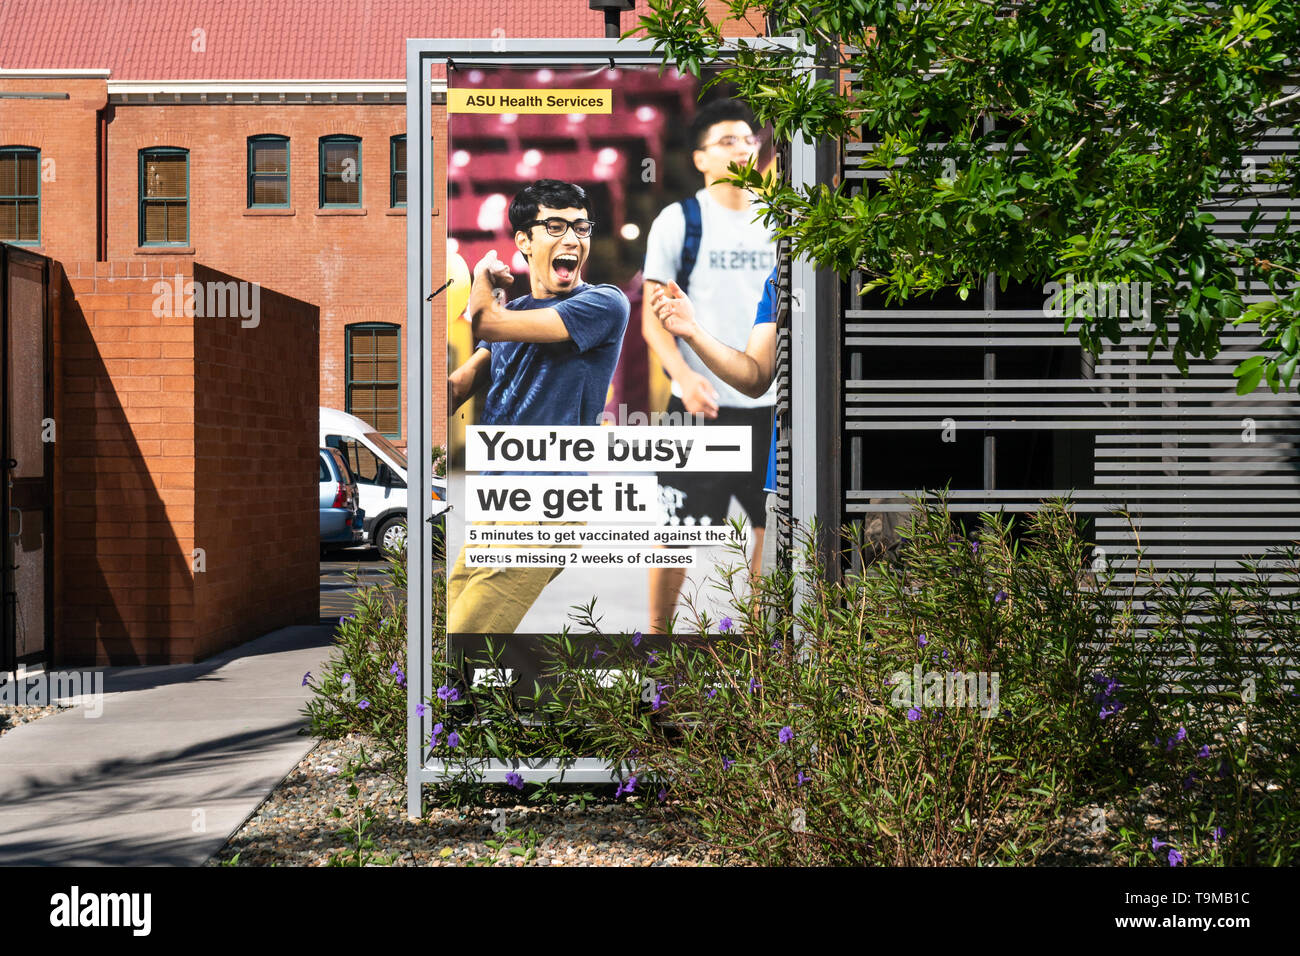 TEMPE, AZ/USA - APRIL 10, 2019: ASU Health Services sign promoting flu vaccinations on the campus of Arizona State University. Stock Photo